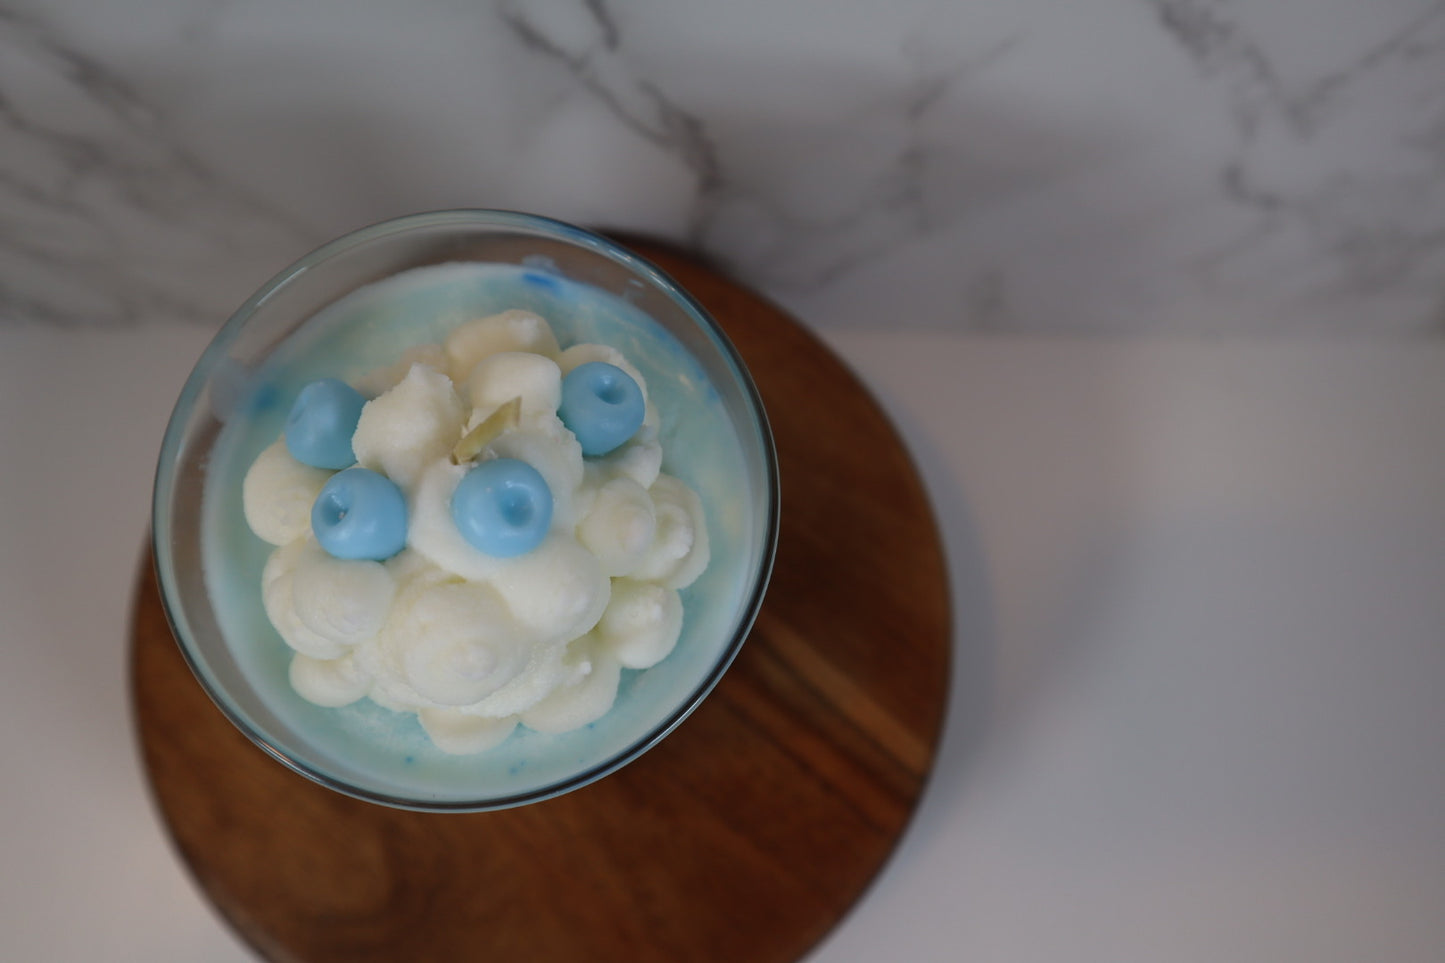 Blueberries & Cream Dessert Candle- from the top- Starlight Soapery 